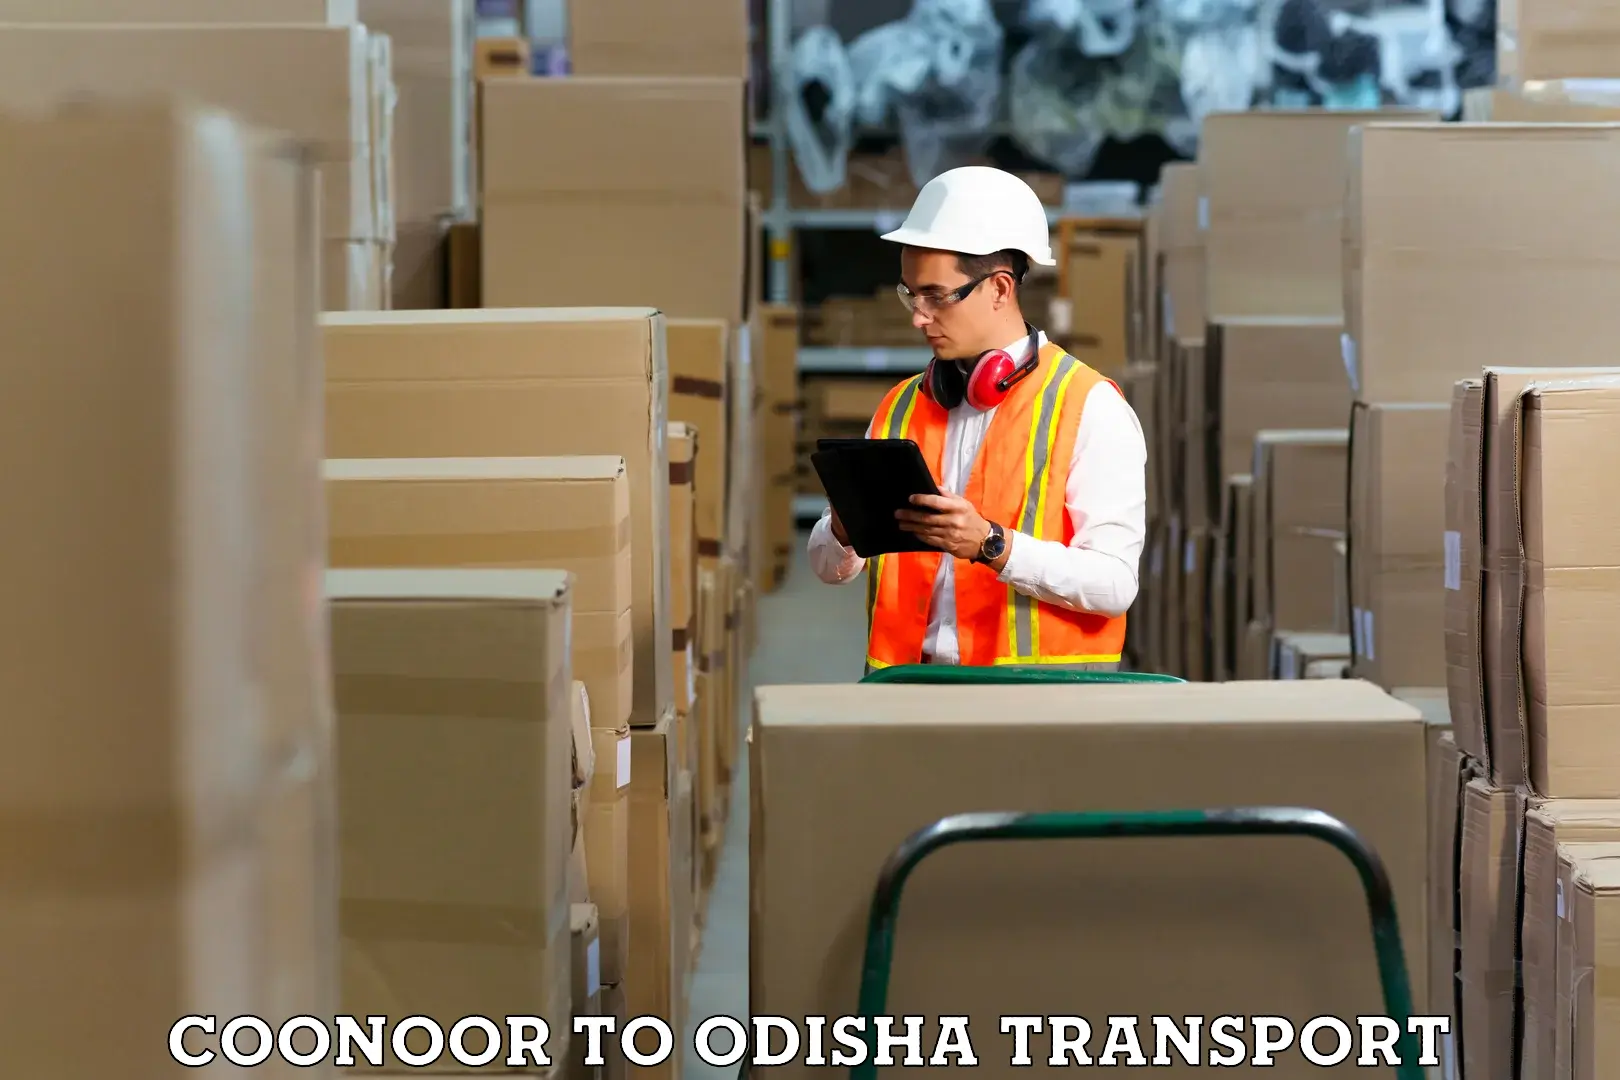 Commercial transport service Coonoor to Odisha